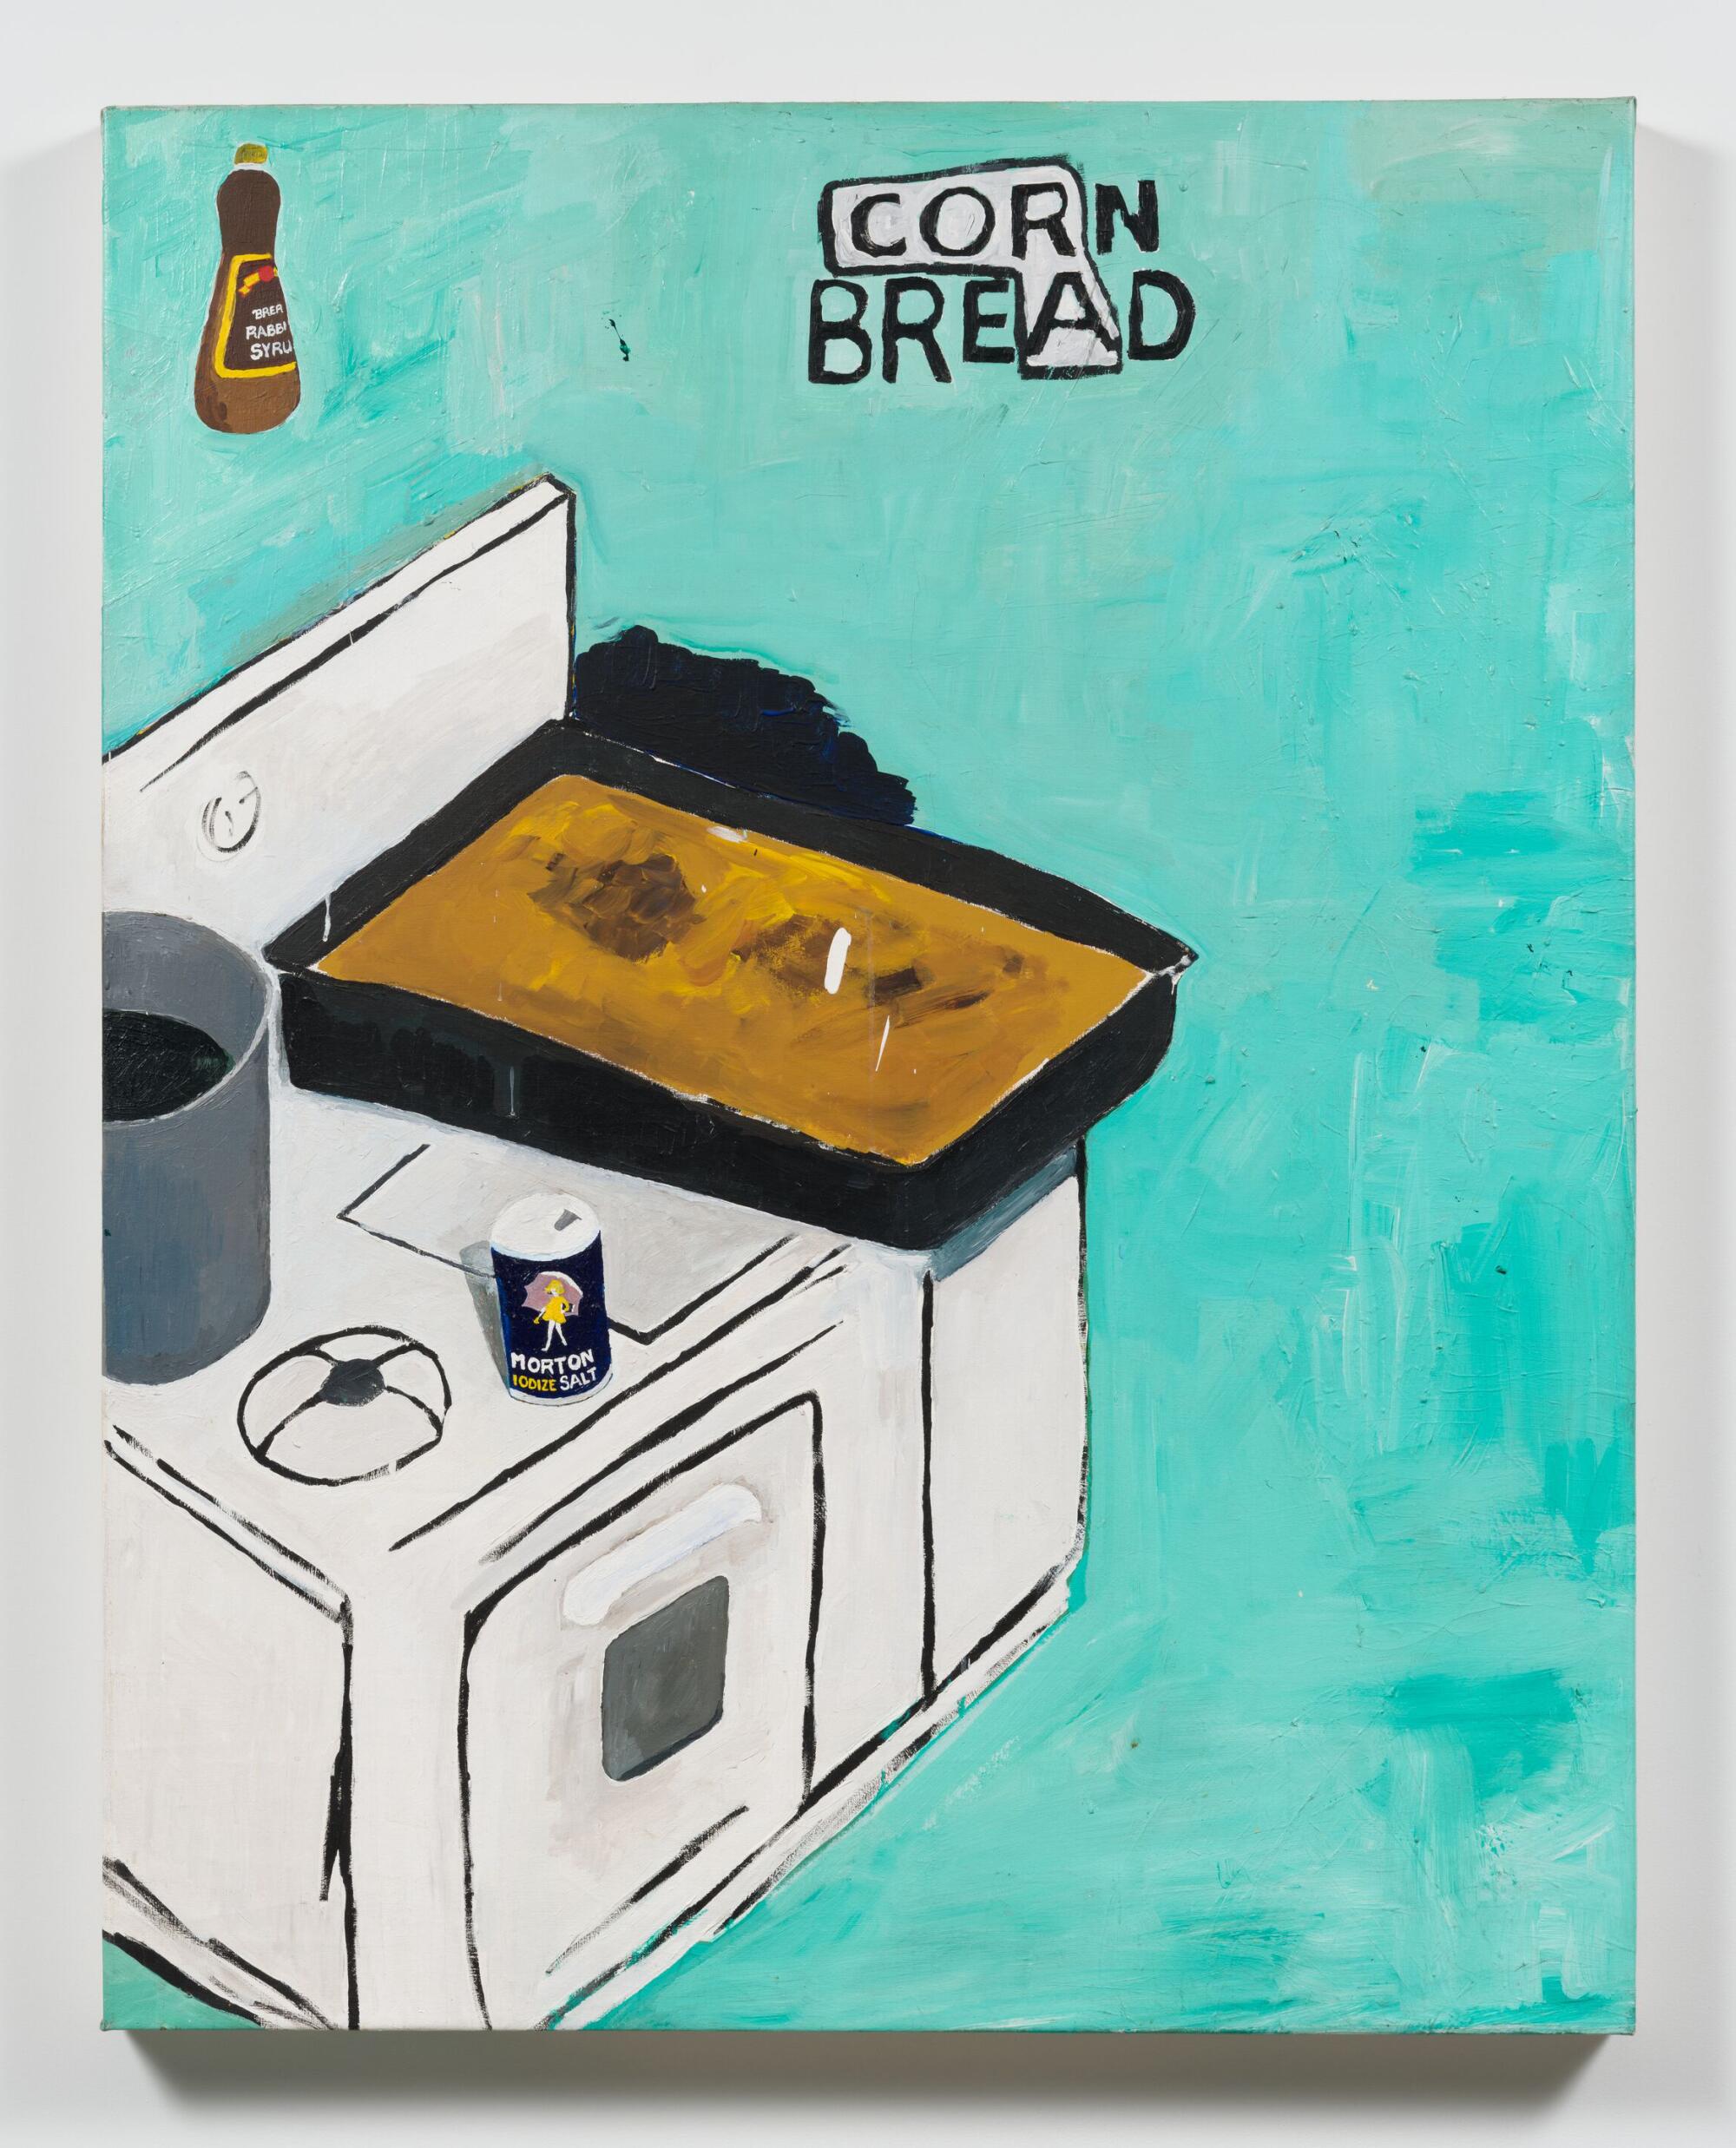 A painting by Henry Taylor shows a tray of cornbread on a stove set against a bright teal background.